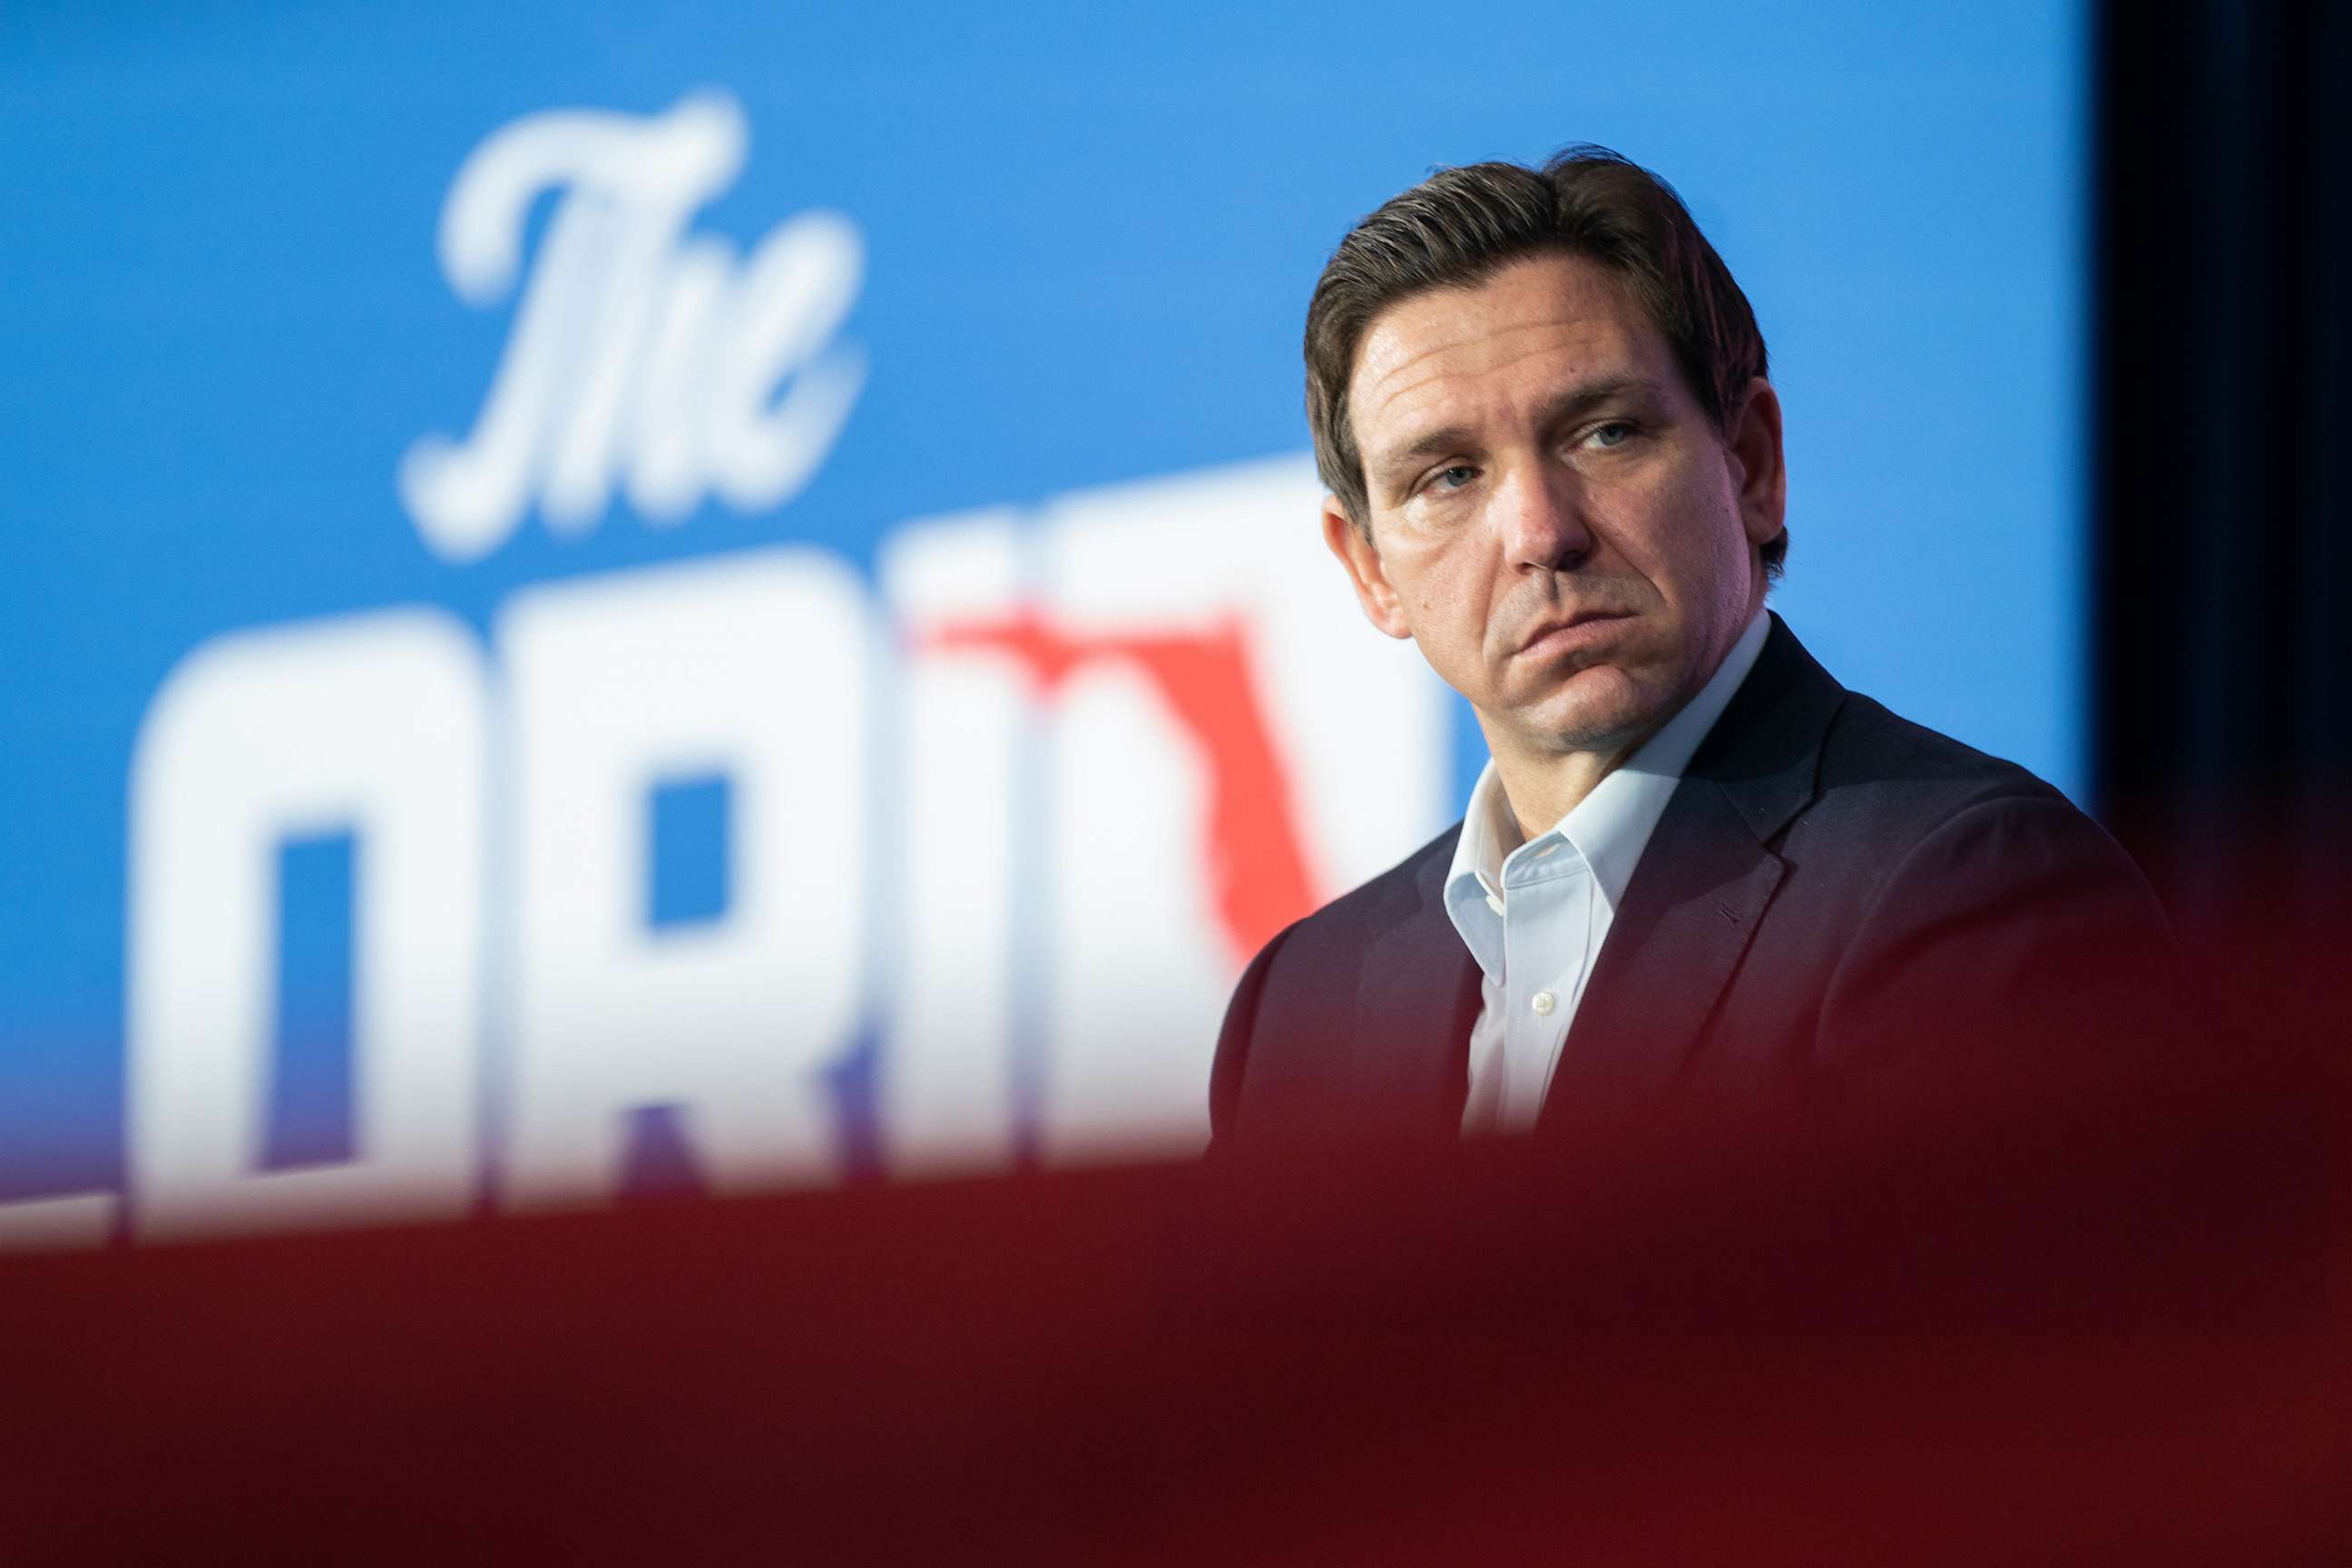 DeSantis' Policies Are Terrible for Moms. He Convinced Them